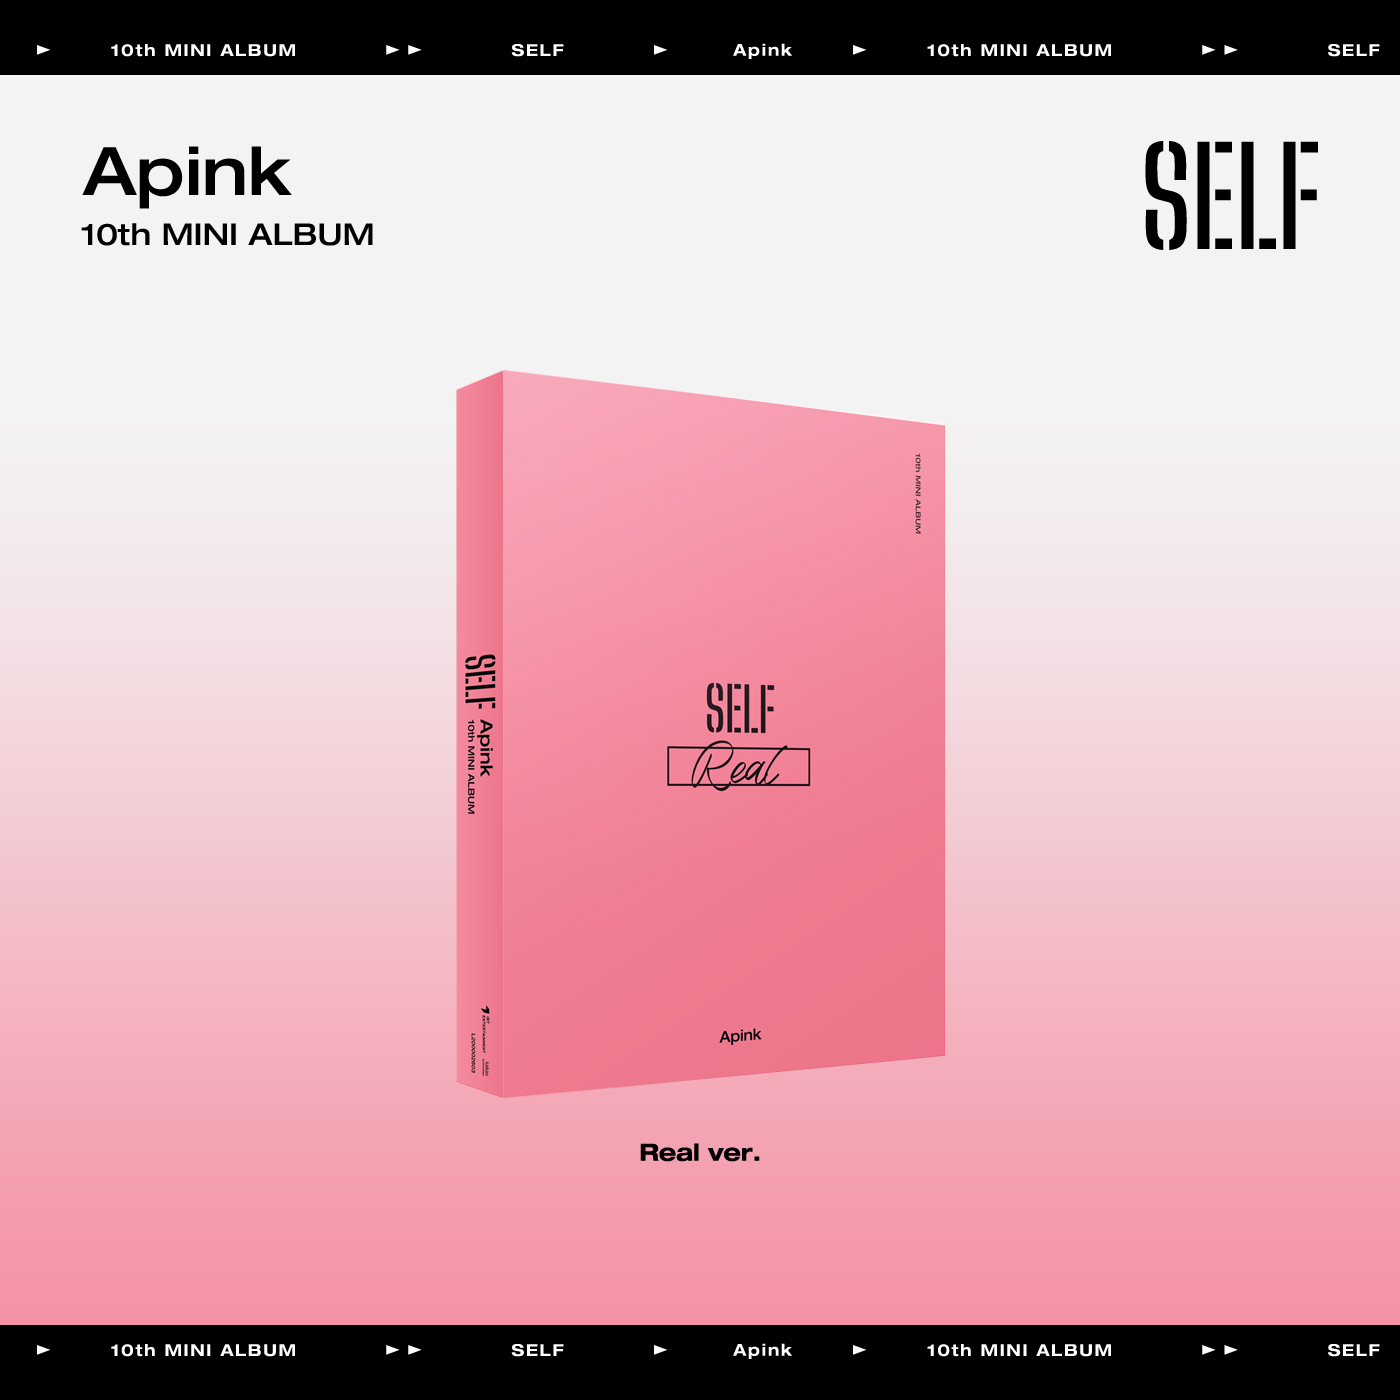 [Ktown4u Special Gift] Apink - 10th Mini Album [SELF] (Real ver.)